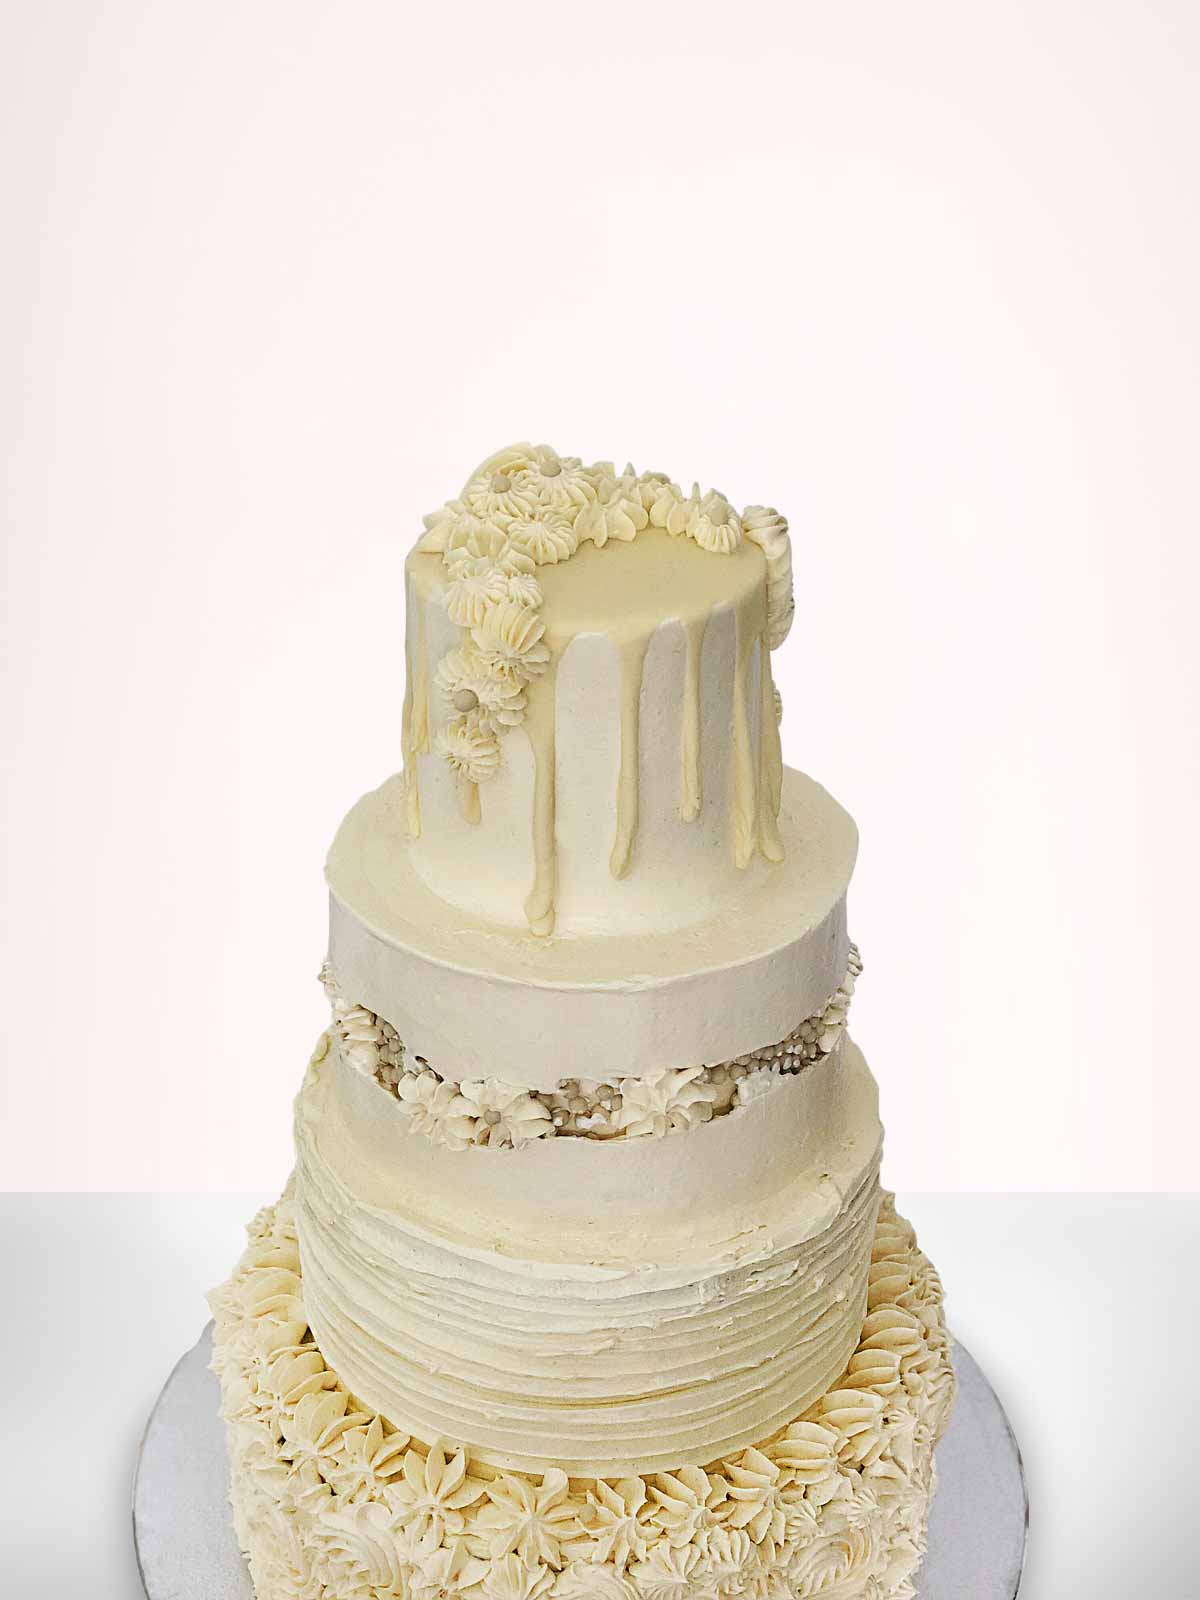 Four-Tiered Buttercream Dream Wedding Cake to Buy Online